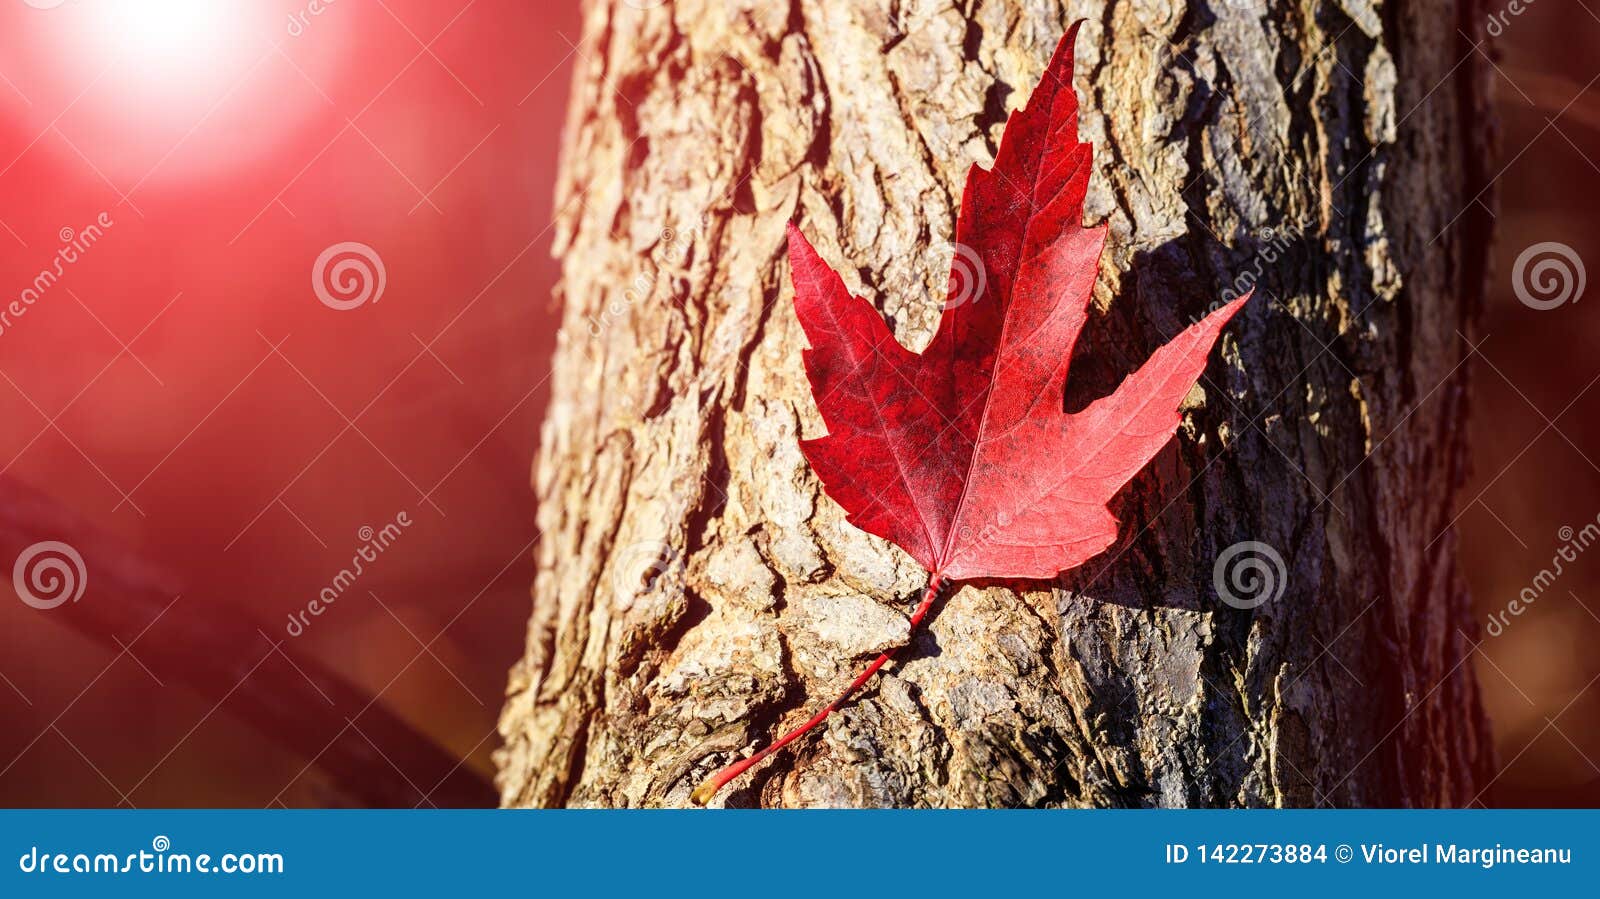 Red Maple Leaf. Canada Day Maple Leaves Background. Falling Red Leaf ...